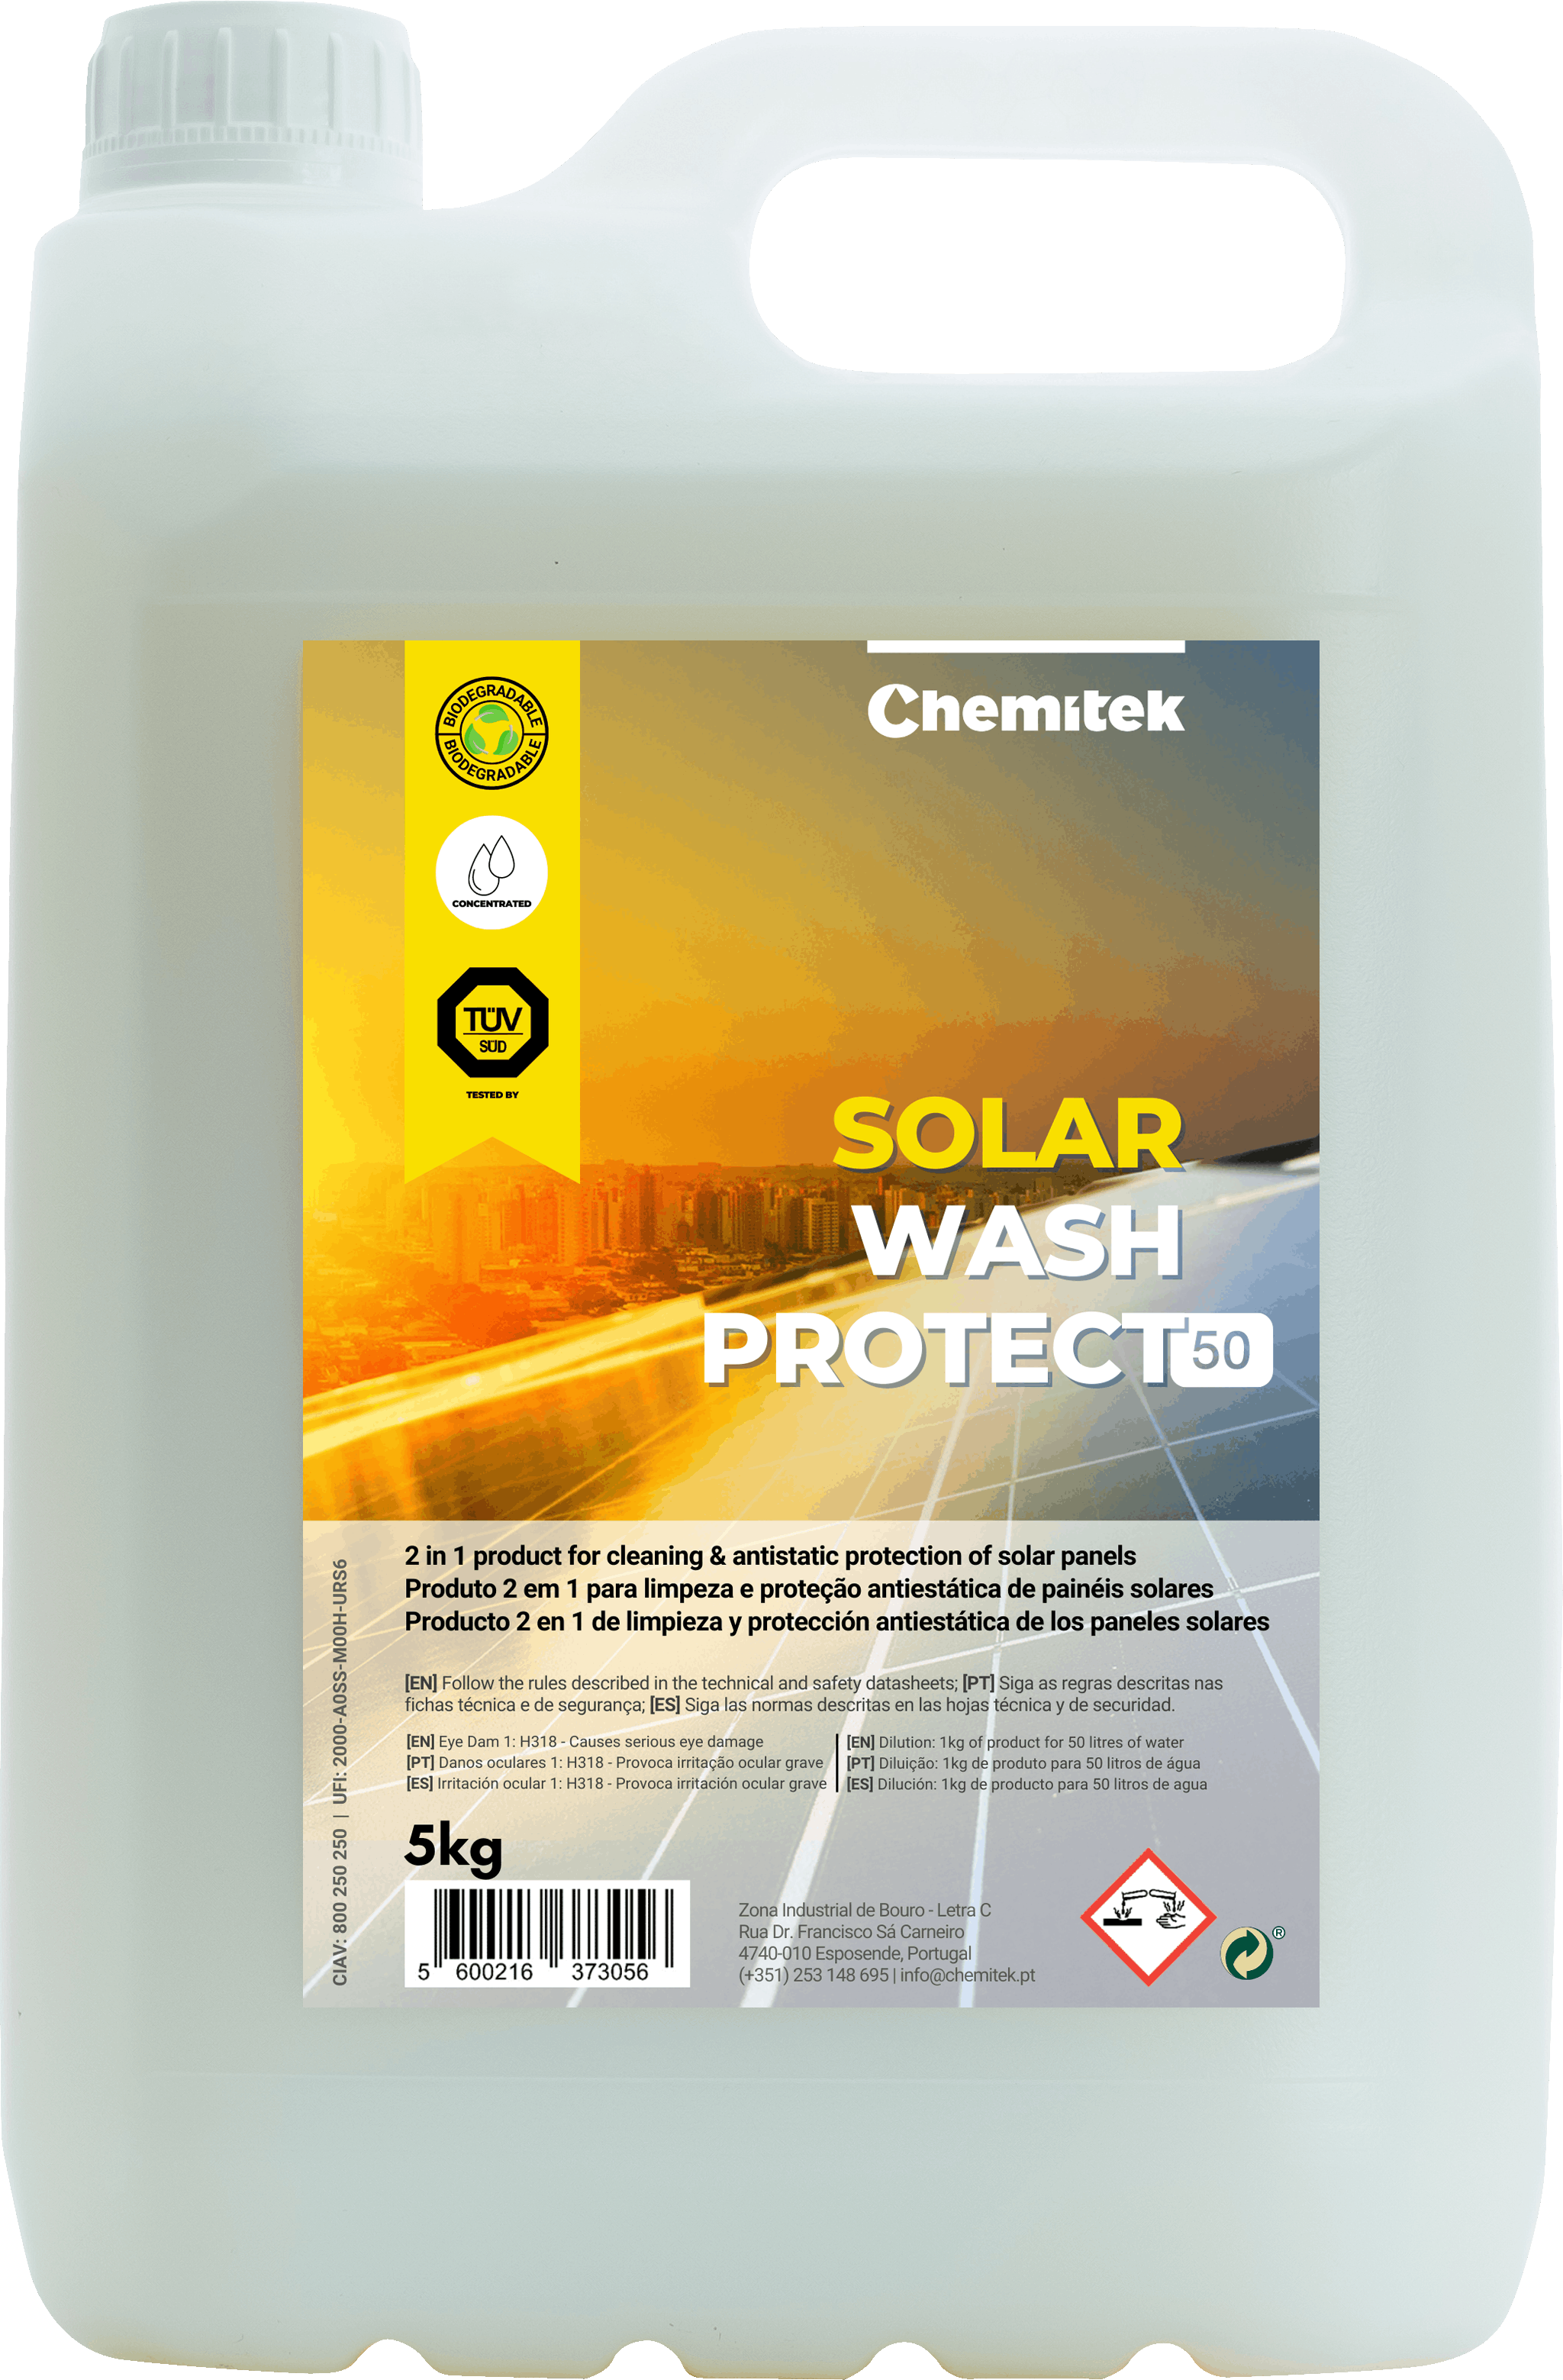 Product - Solar Wash Protect